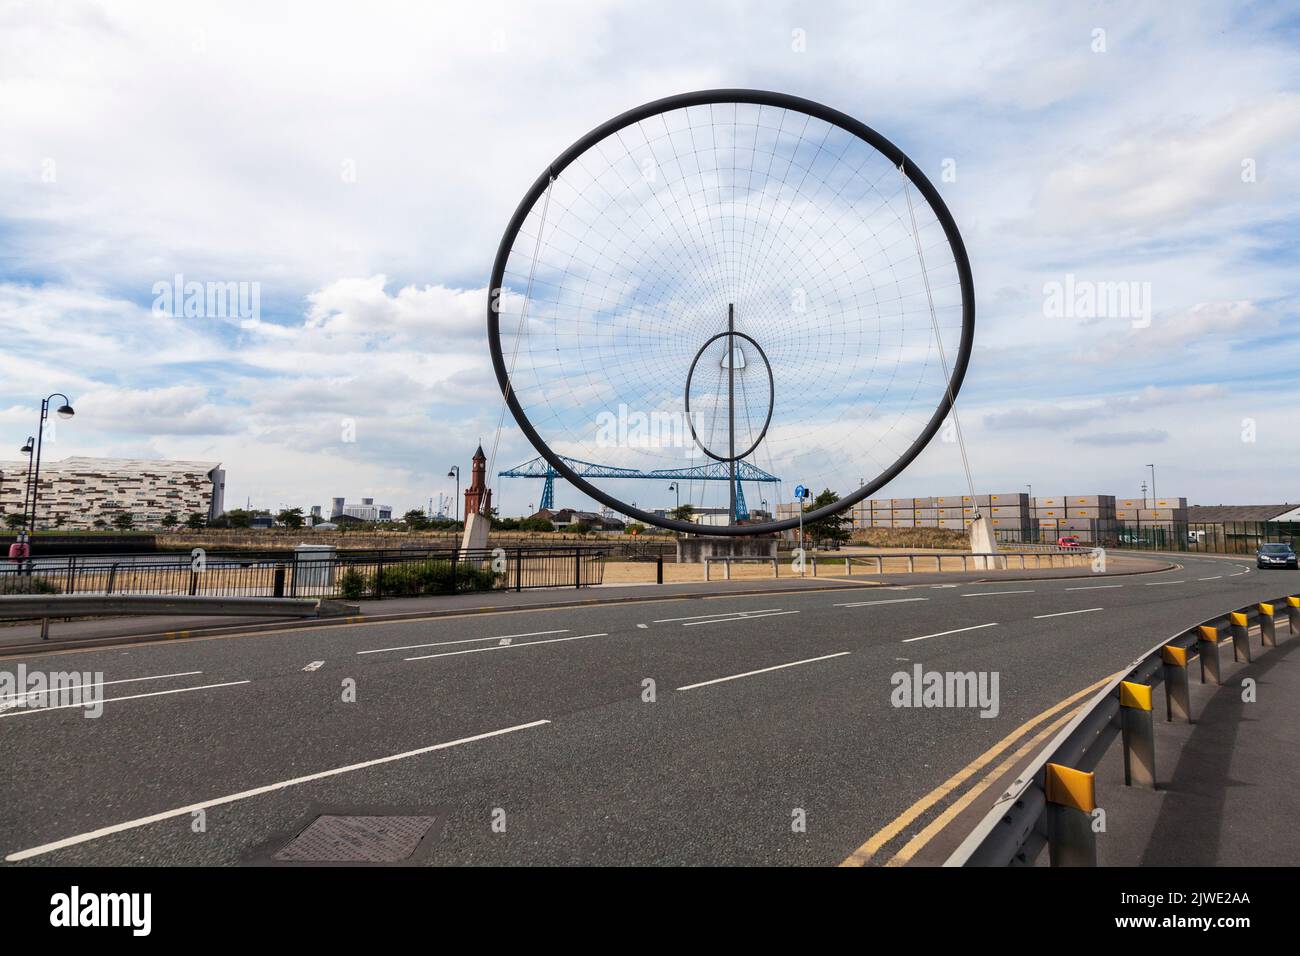 A view of the Temenos art structure by Anish Kapoor with the clock tower and Transporter Bridge in background in Middlesbrough Stock Photo